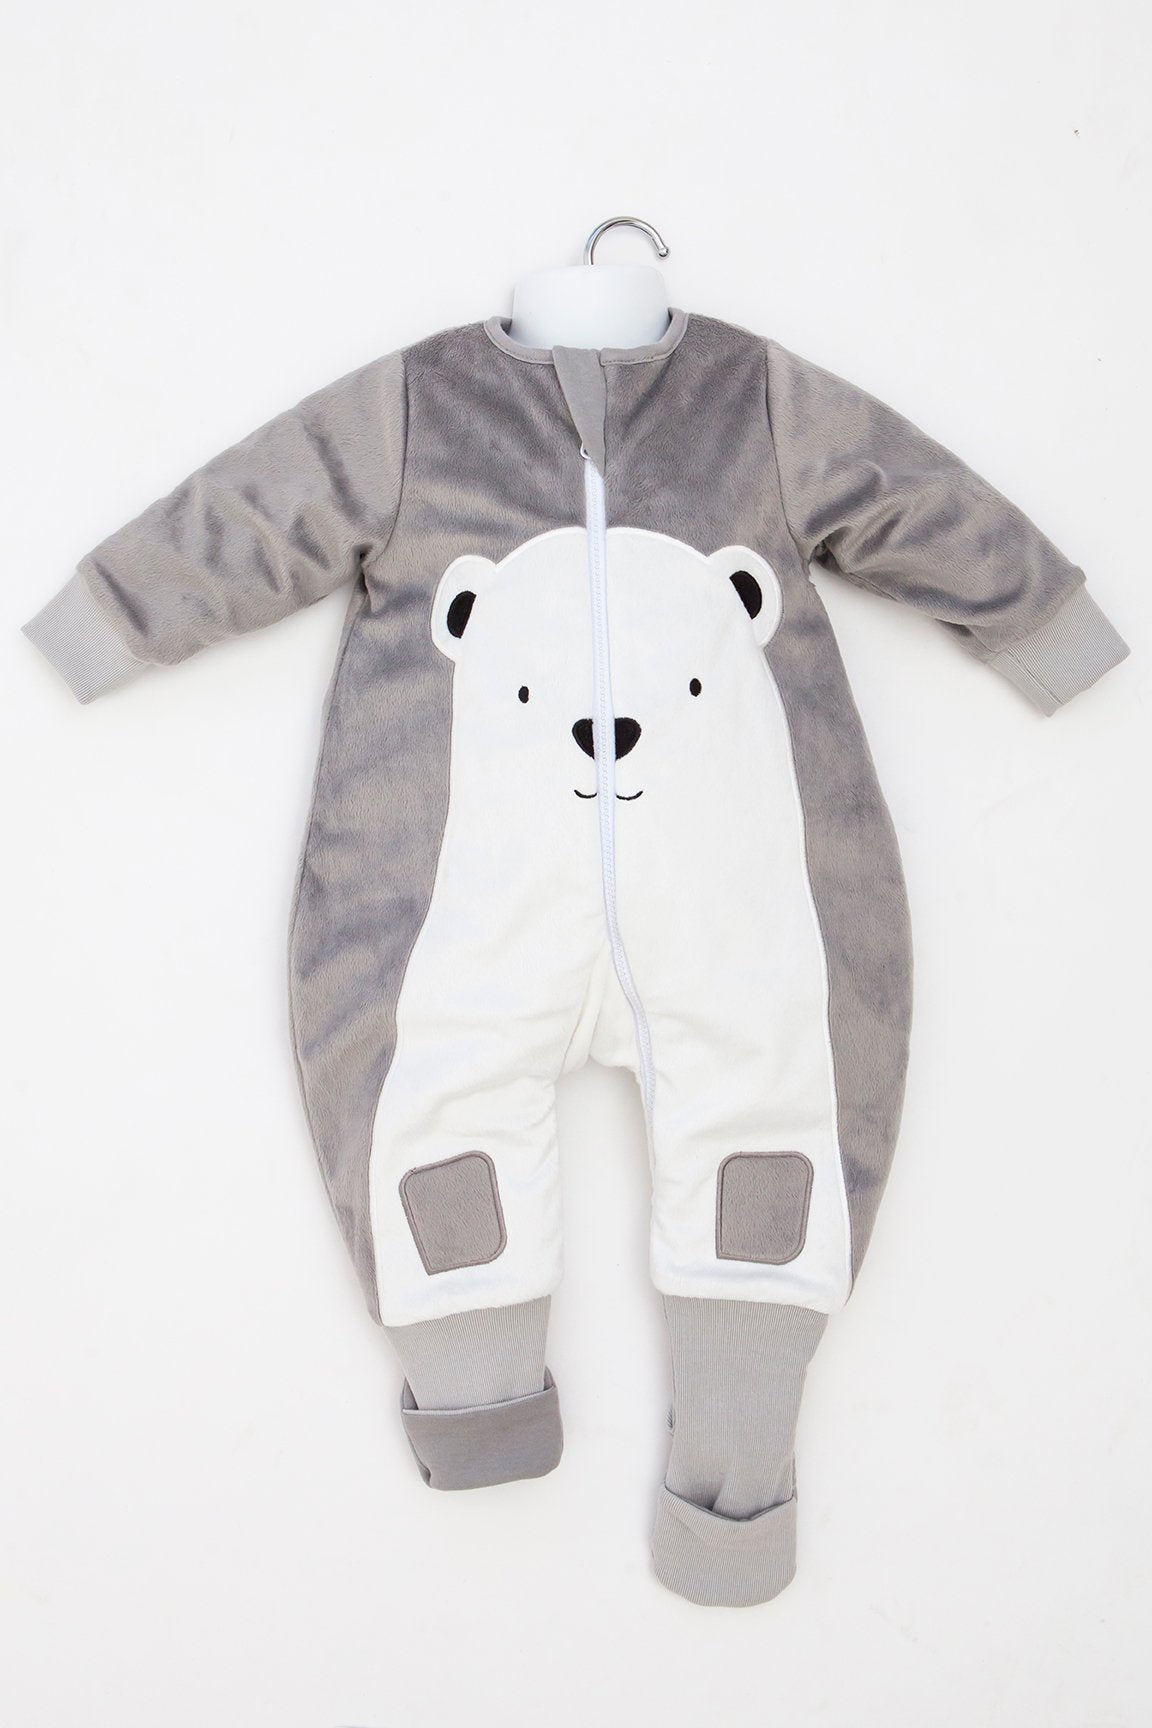 Baby Studio Warmies with Arms 3.0tog